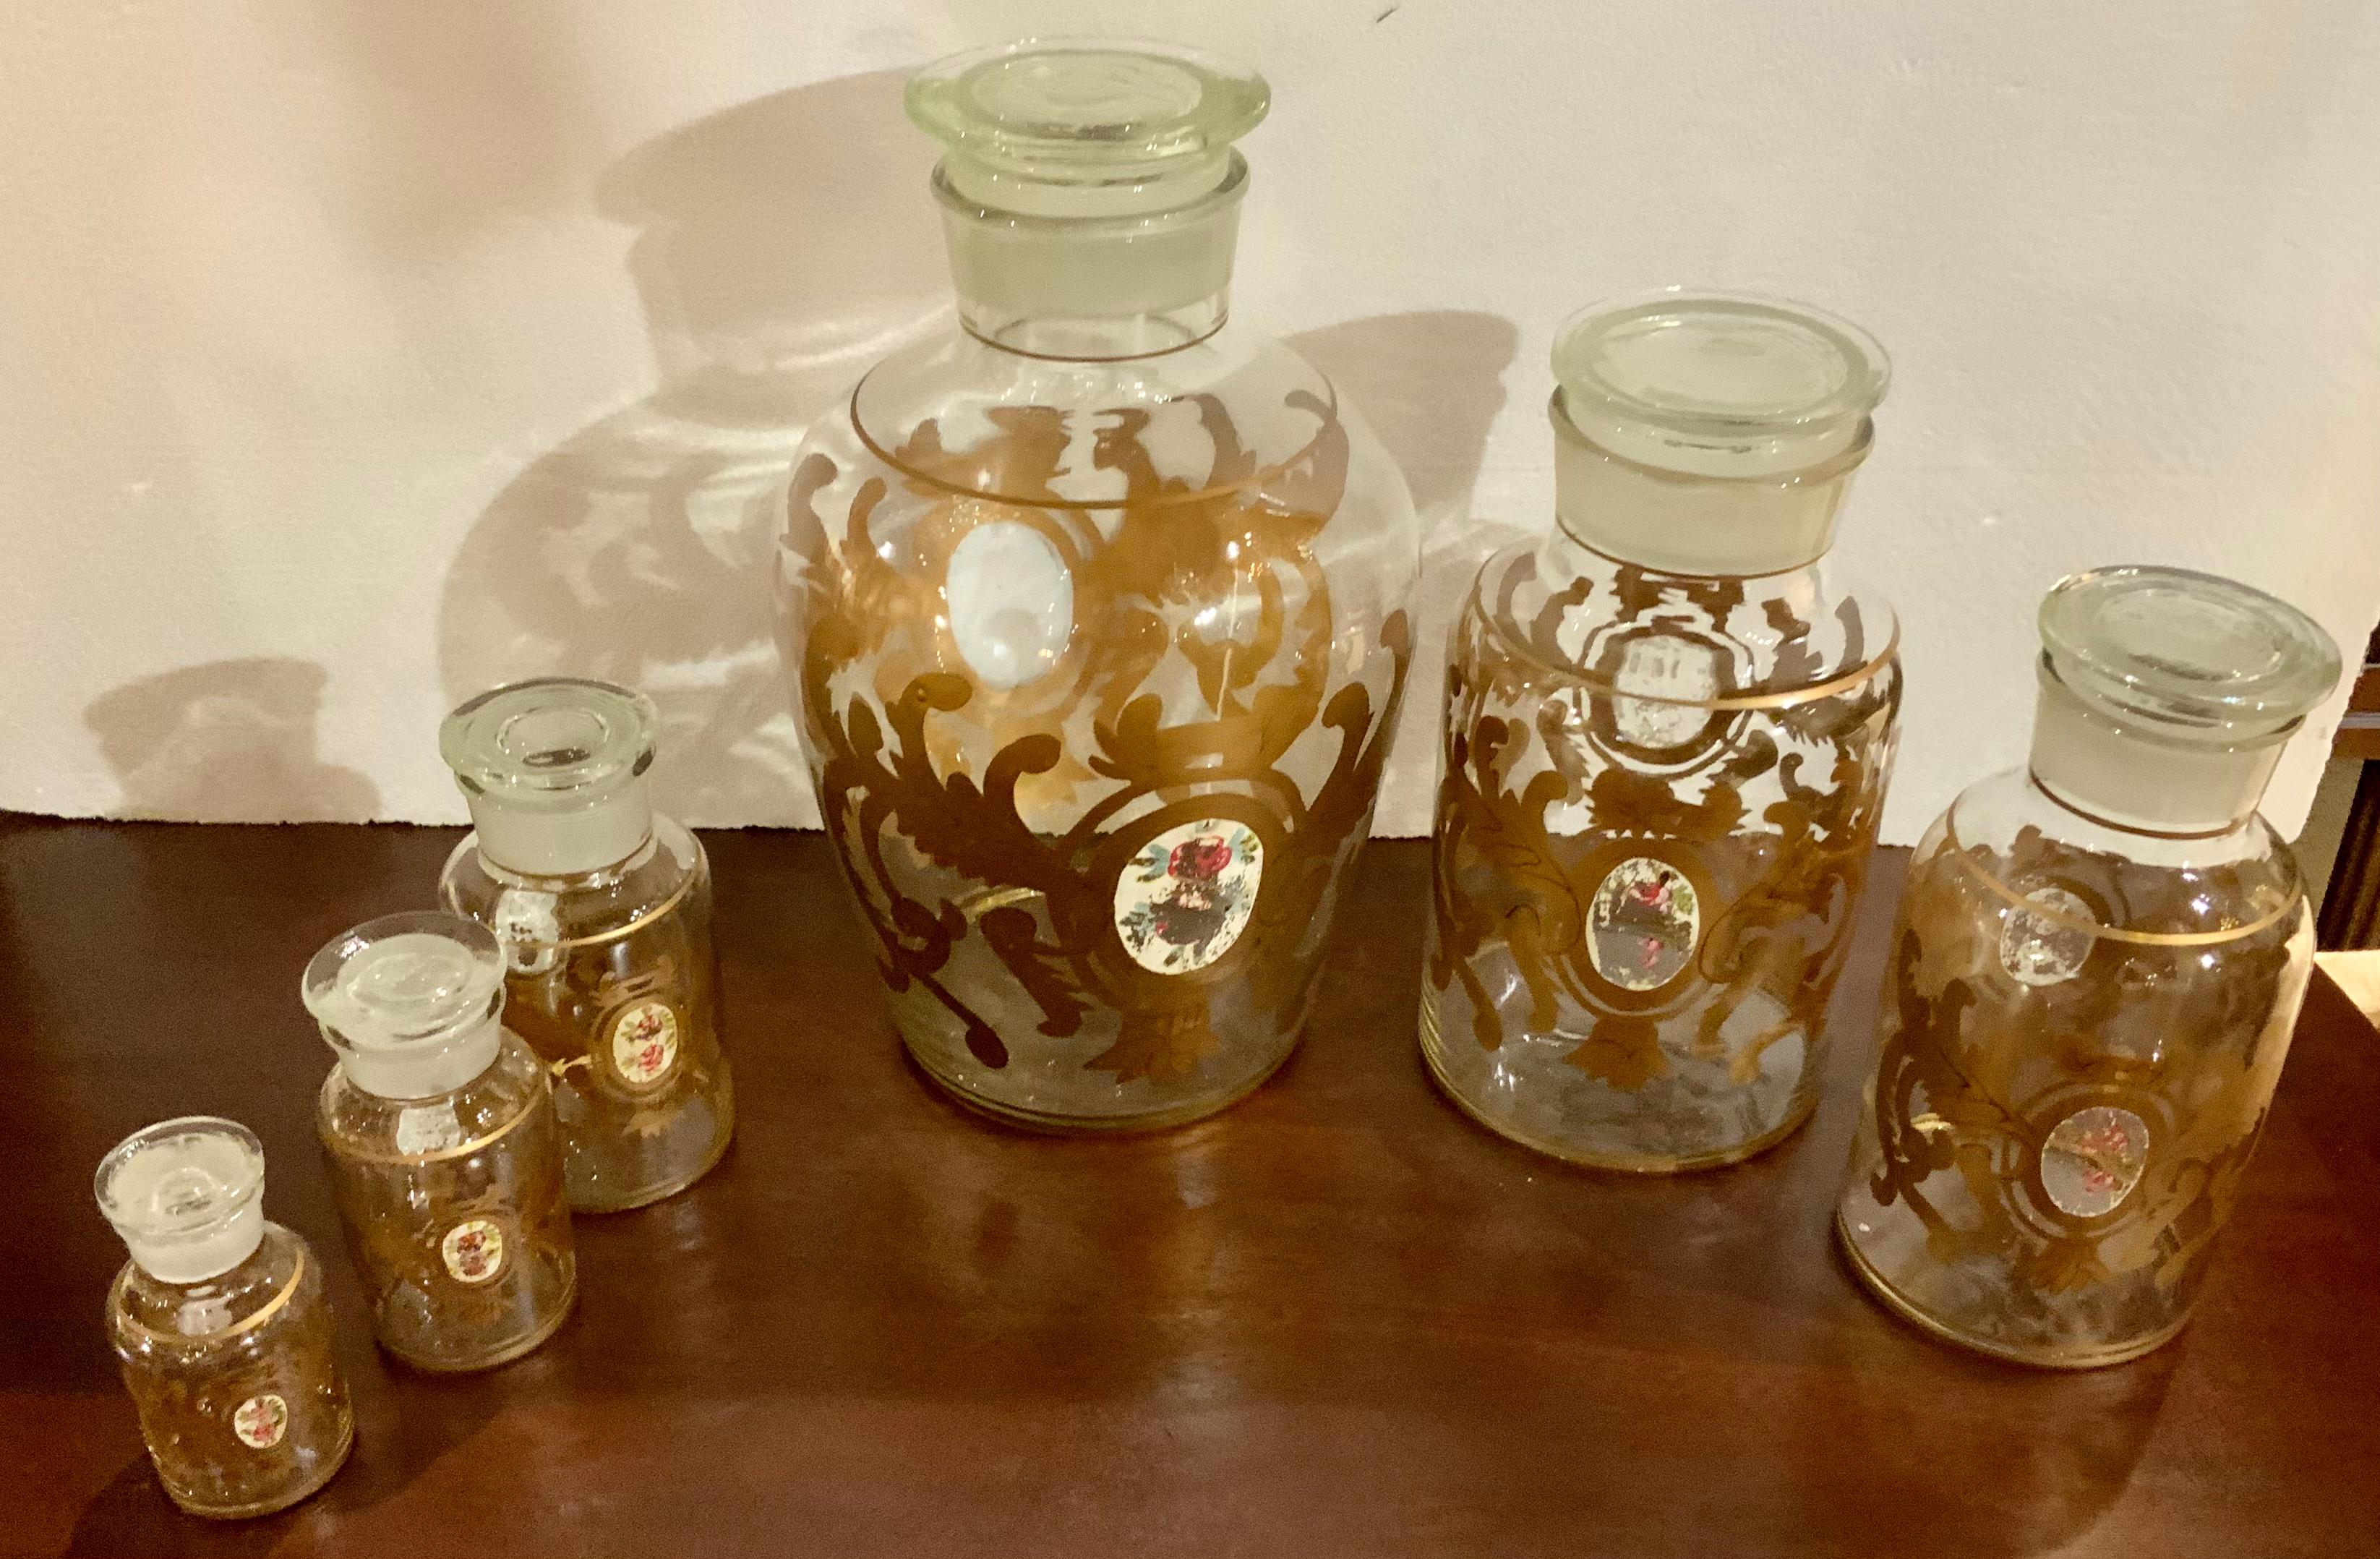 This set is unique because it is a complete set of six hand blown
Apothecary jars with their lids. No breaks or missing pieces!
The gold design encompasses the round shape and a cameo.
With rose design is centered on the front.